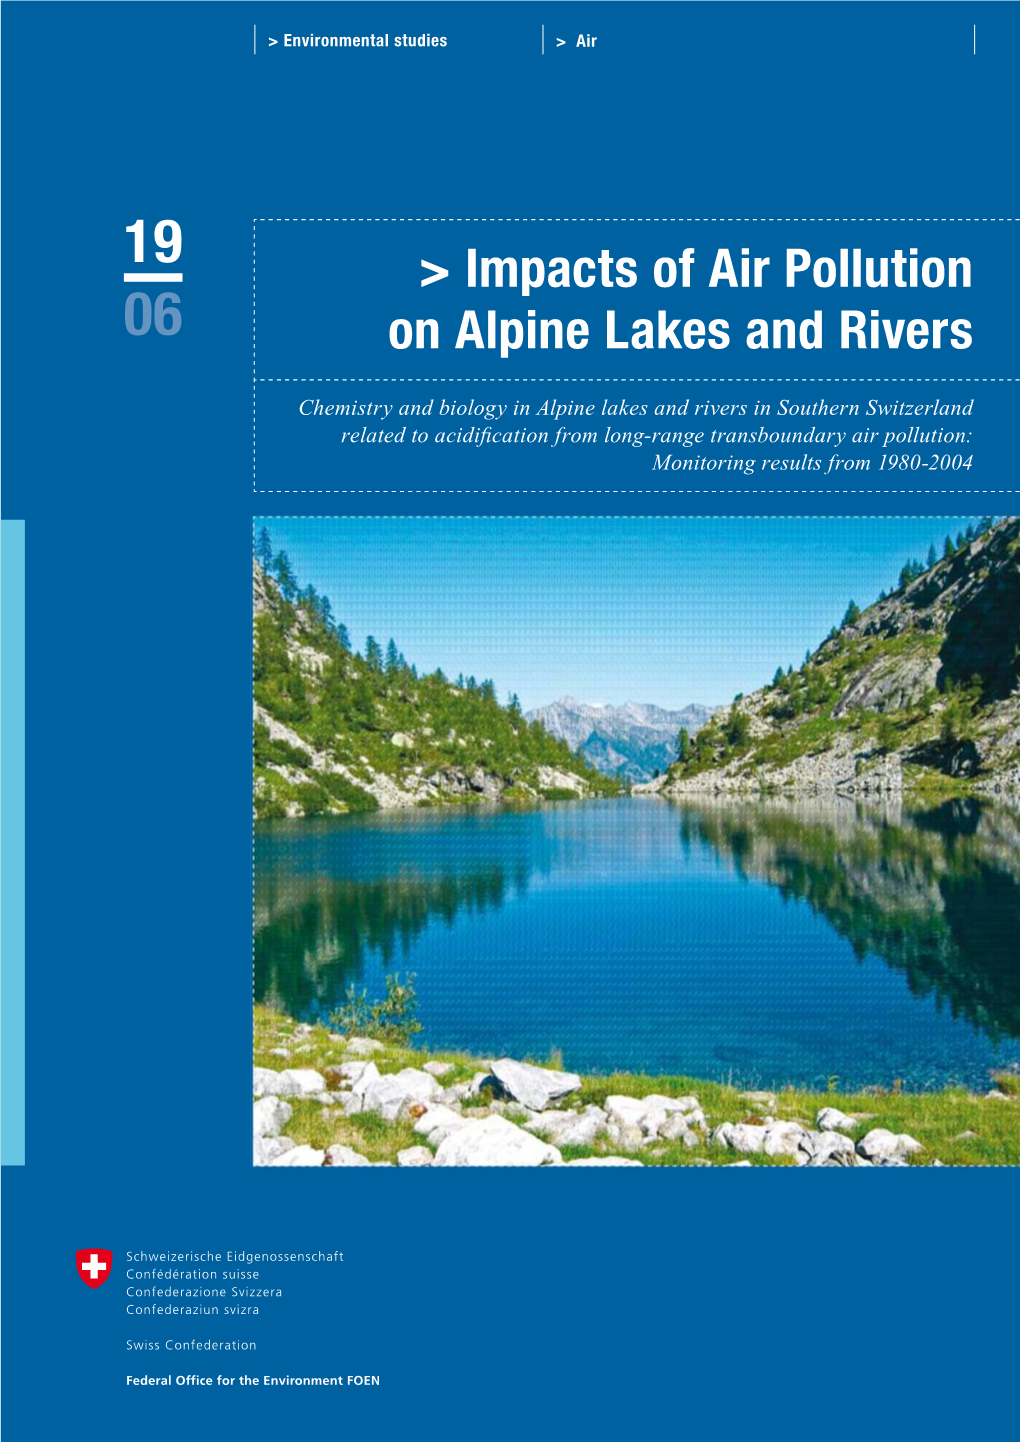 Impacts of Air Pollution on Alpine Lakes and Rivers